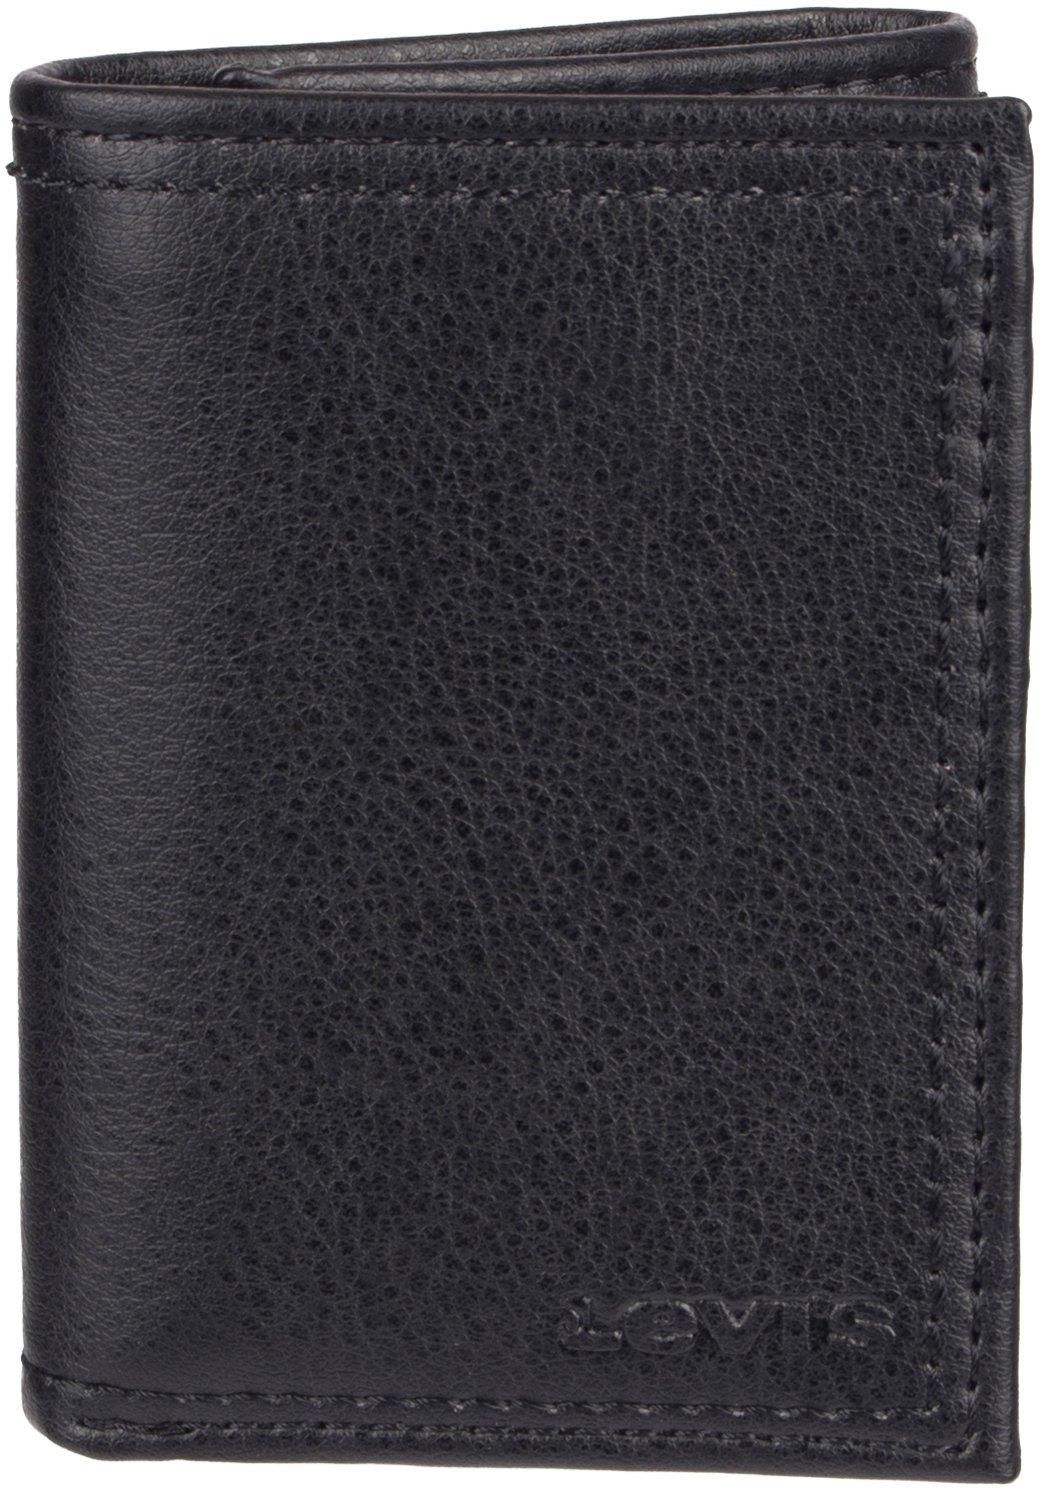 Mens RFID-Blocking Trifold Wallet With Zipper Closure